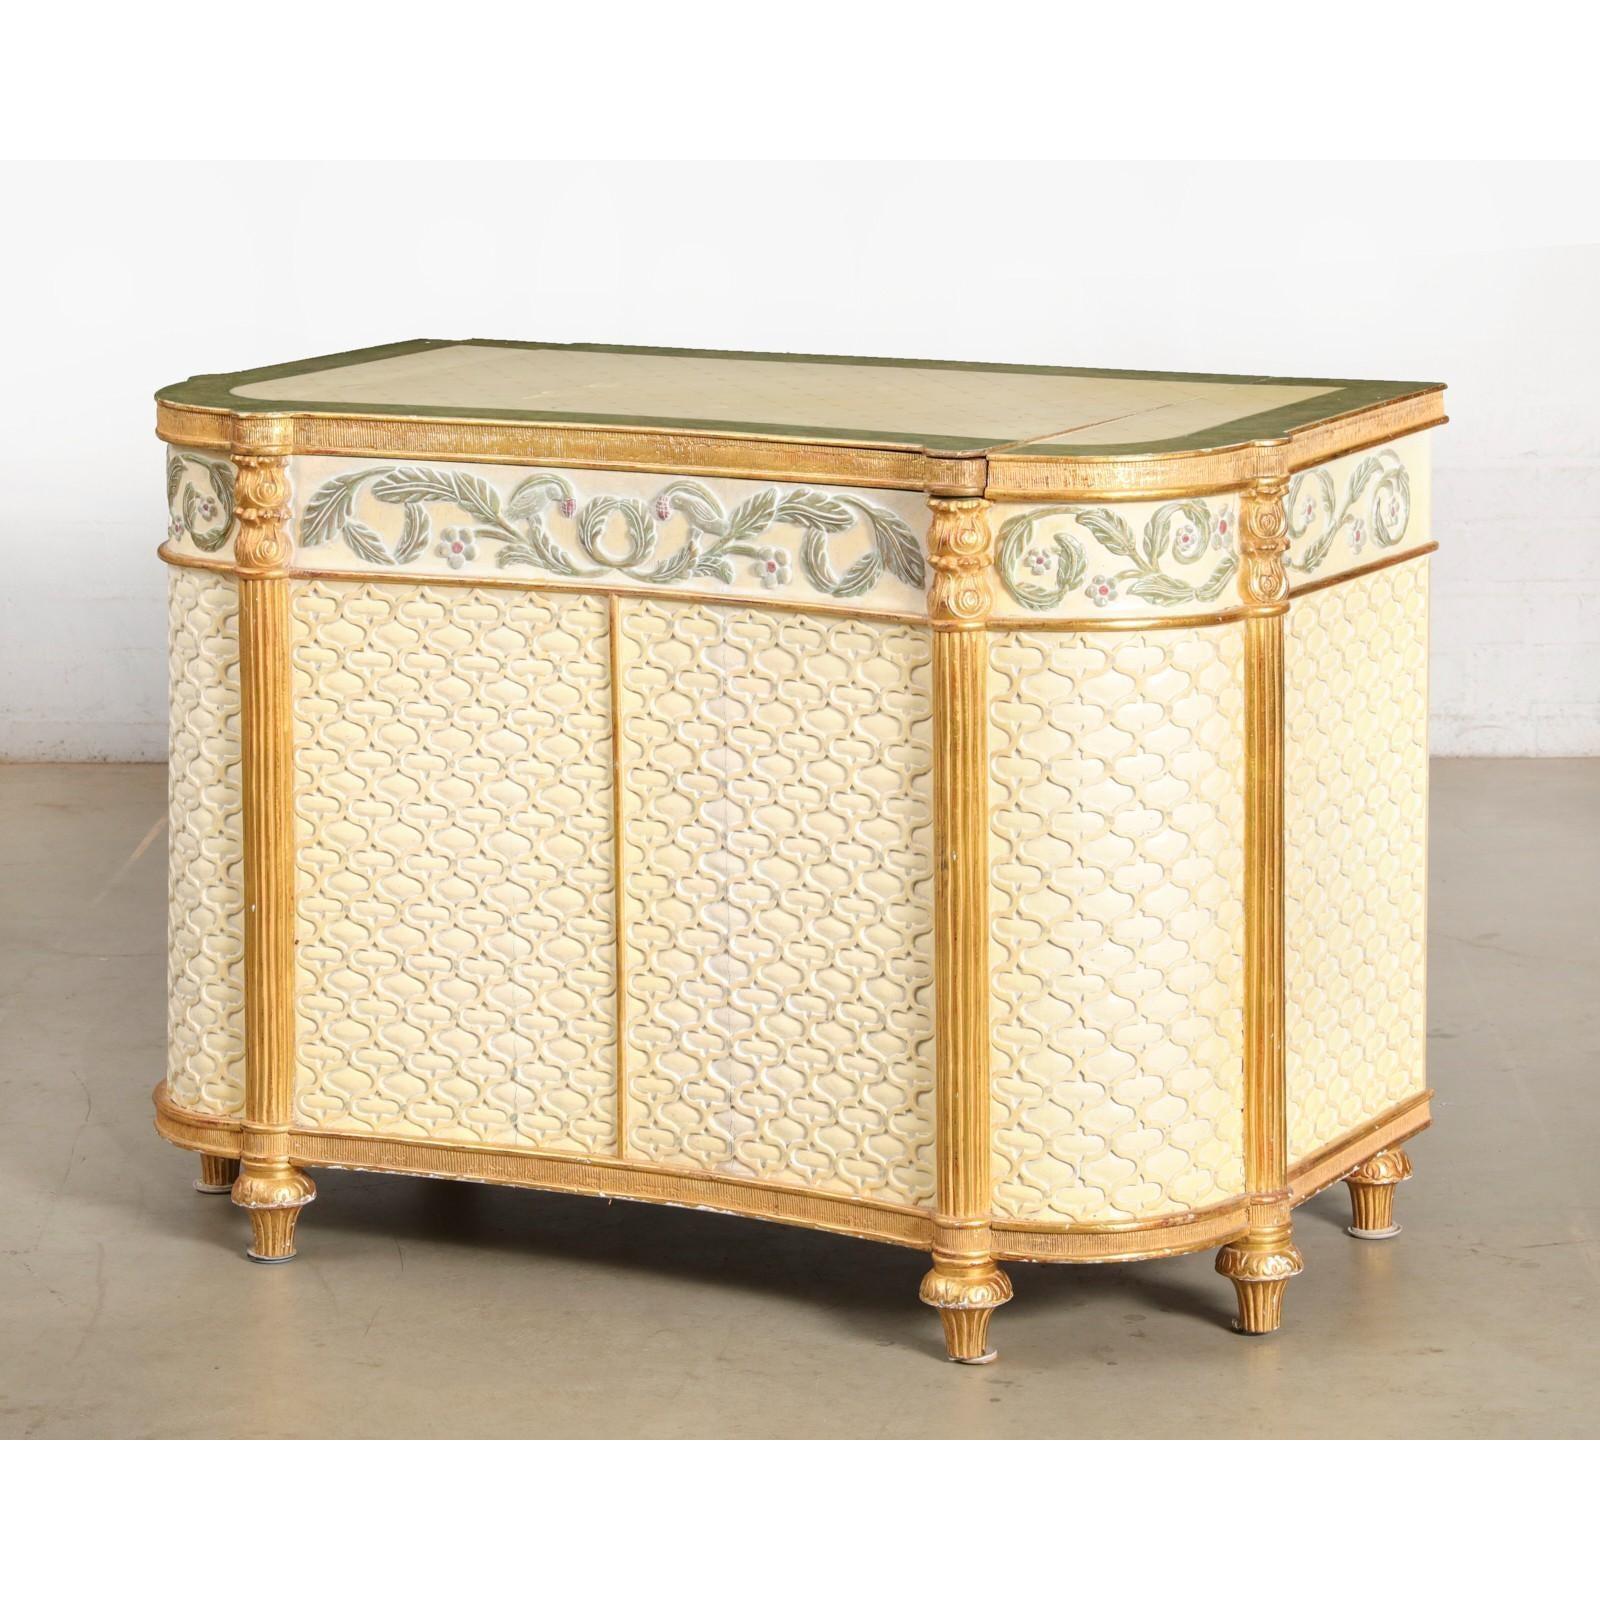 Louis XVI Suzanne Geismar Giltwood Blue & White Paint Decorated Commode/Television Cabinet For Sale